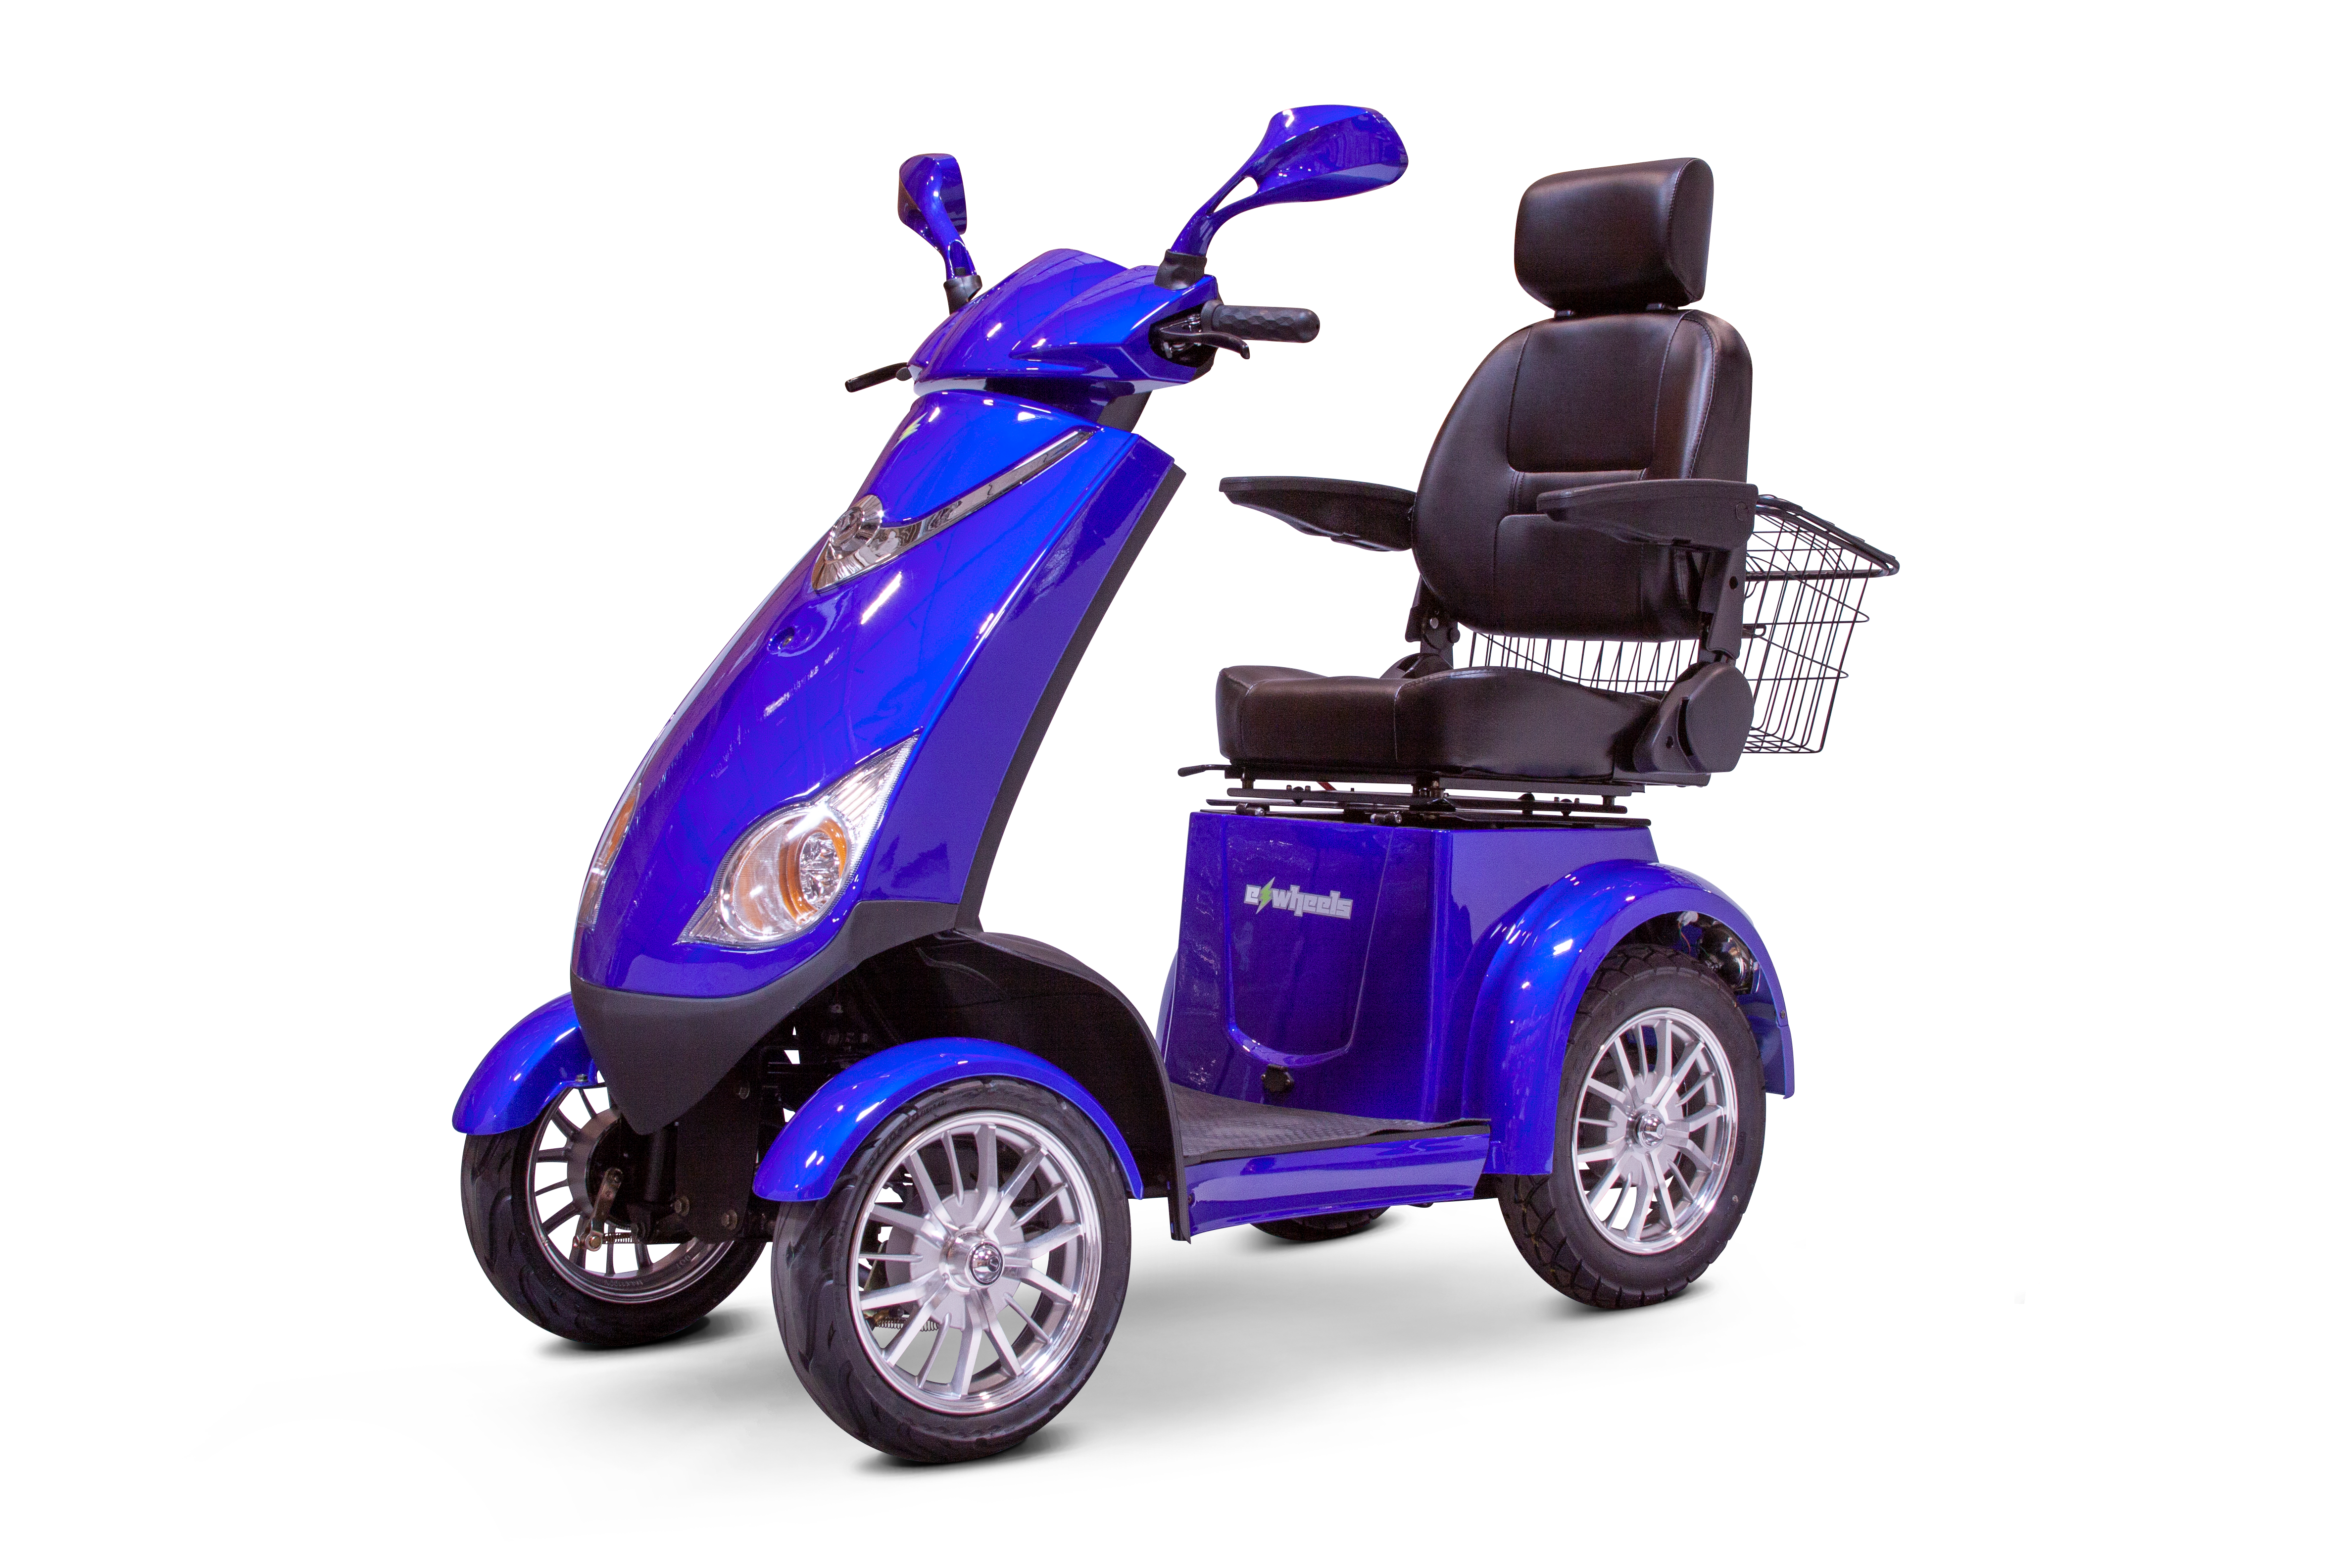 BLUE 4 WHEEL SCOOTER EW-72 Electric 4 Wheel Mobility Scooter for Adults- Fully Assembled & Ready To Go - PureUps